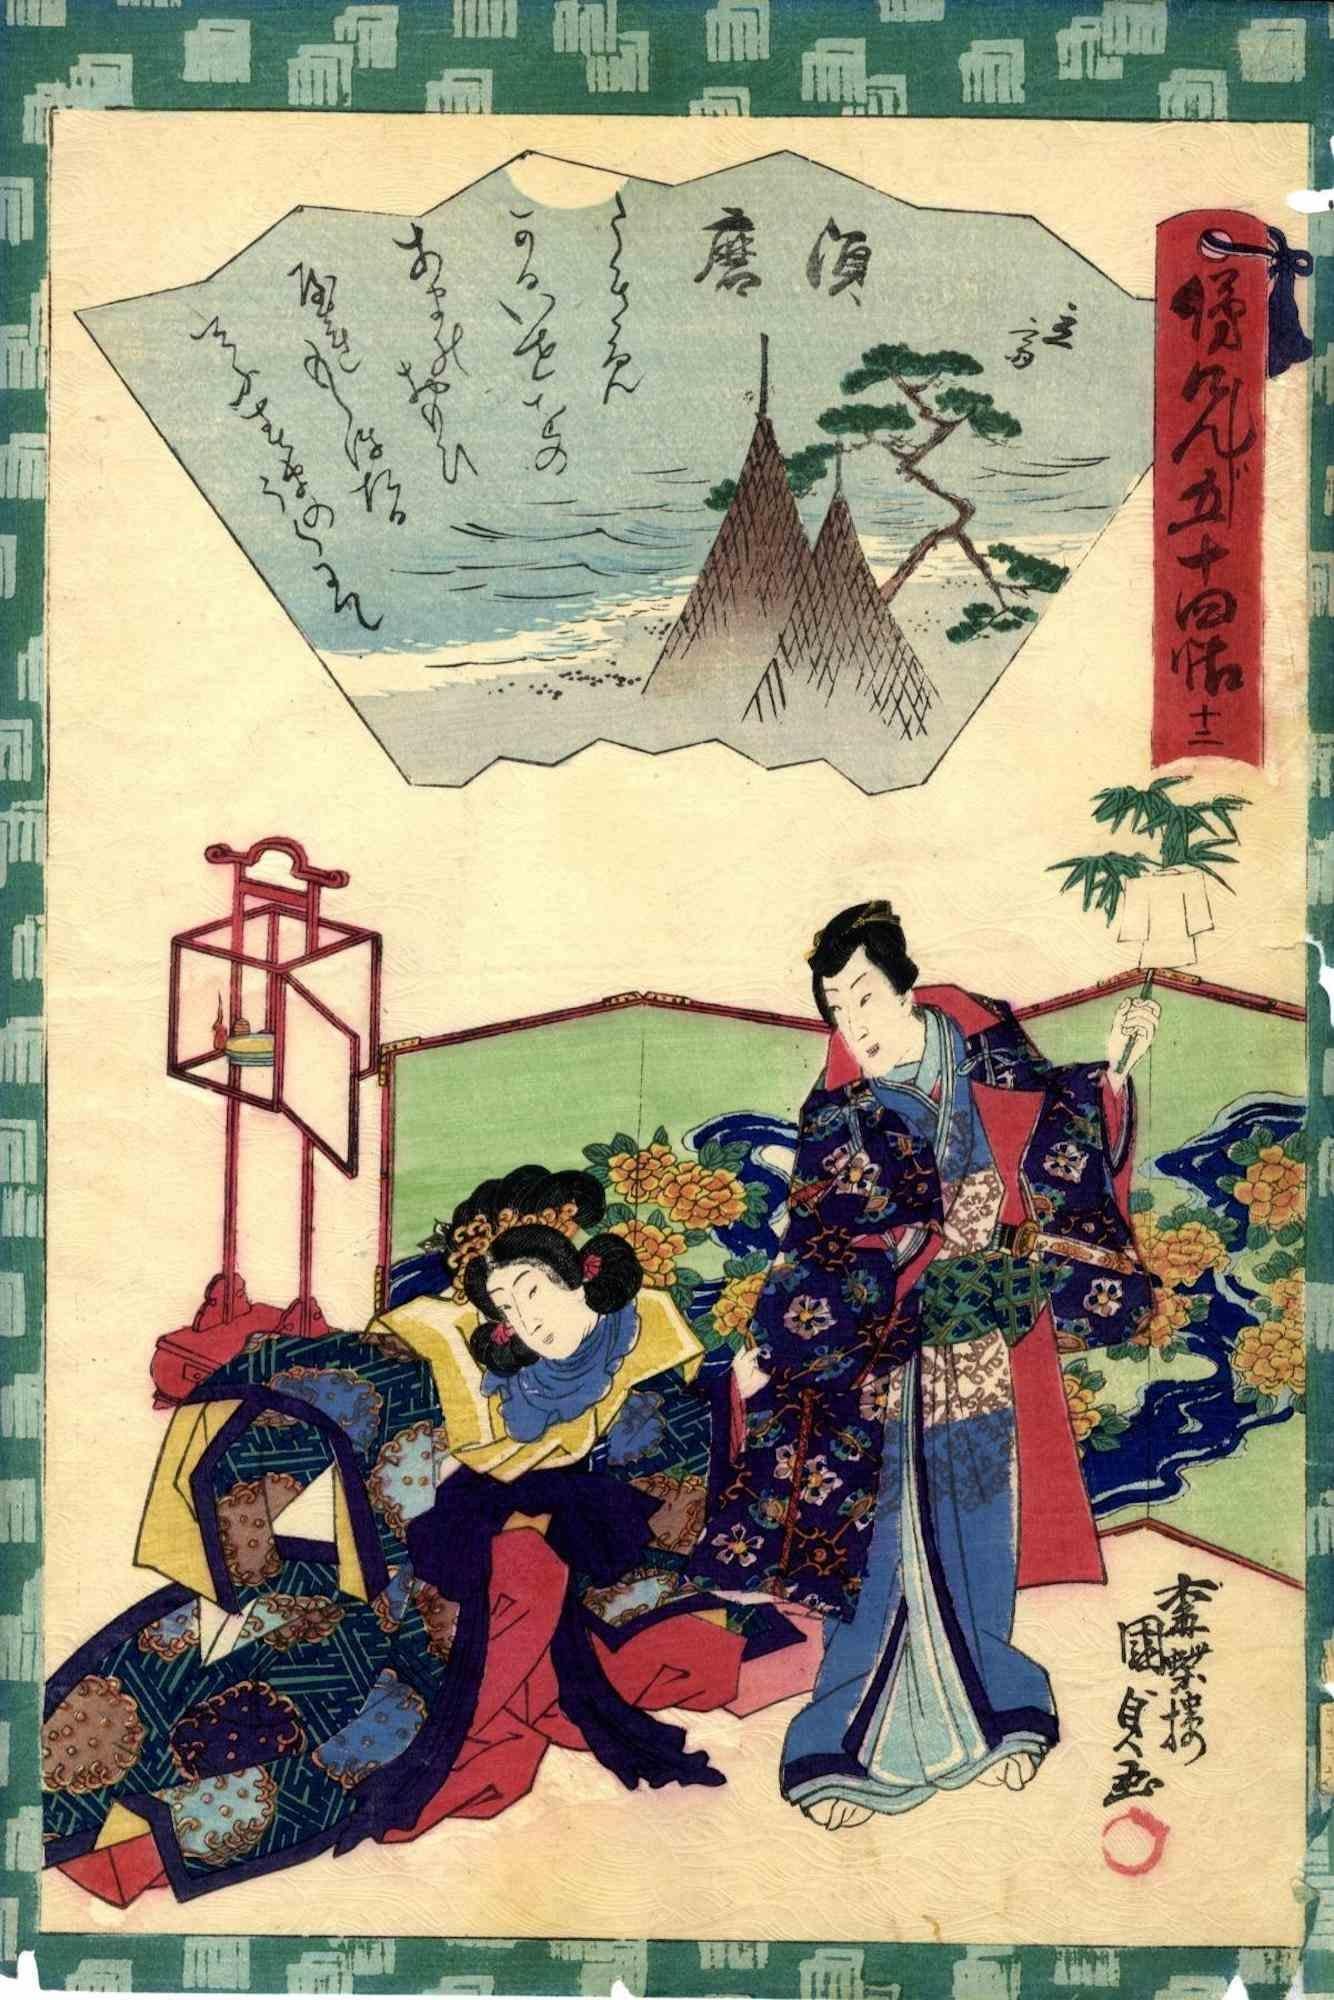 Suma is an original modern artwork realized by Utagawa Kunisada II and Hiroshige II in 1864.

Woodcut Print Oban Format.

From the series "Omokage Genji gojuyo" (In reference to the 54 episodes of Genji), the 12th episode "Suma". Genji stands in